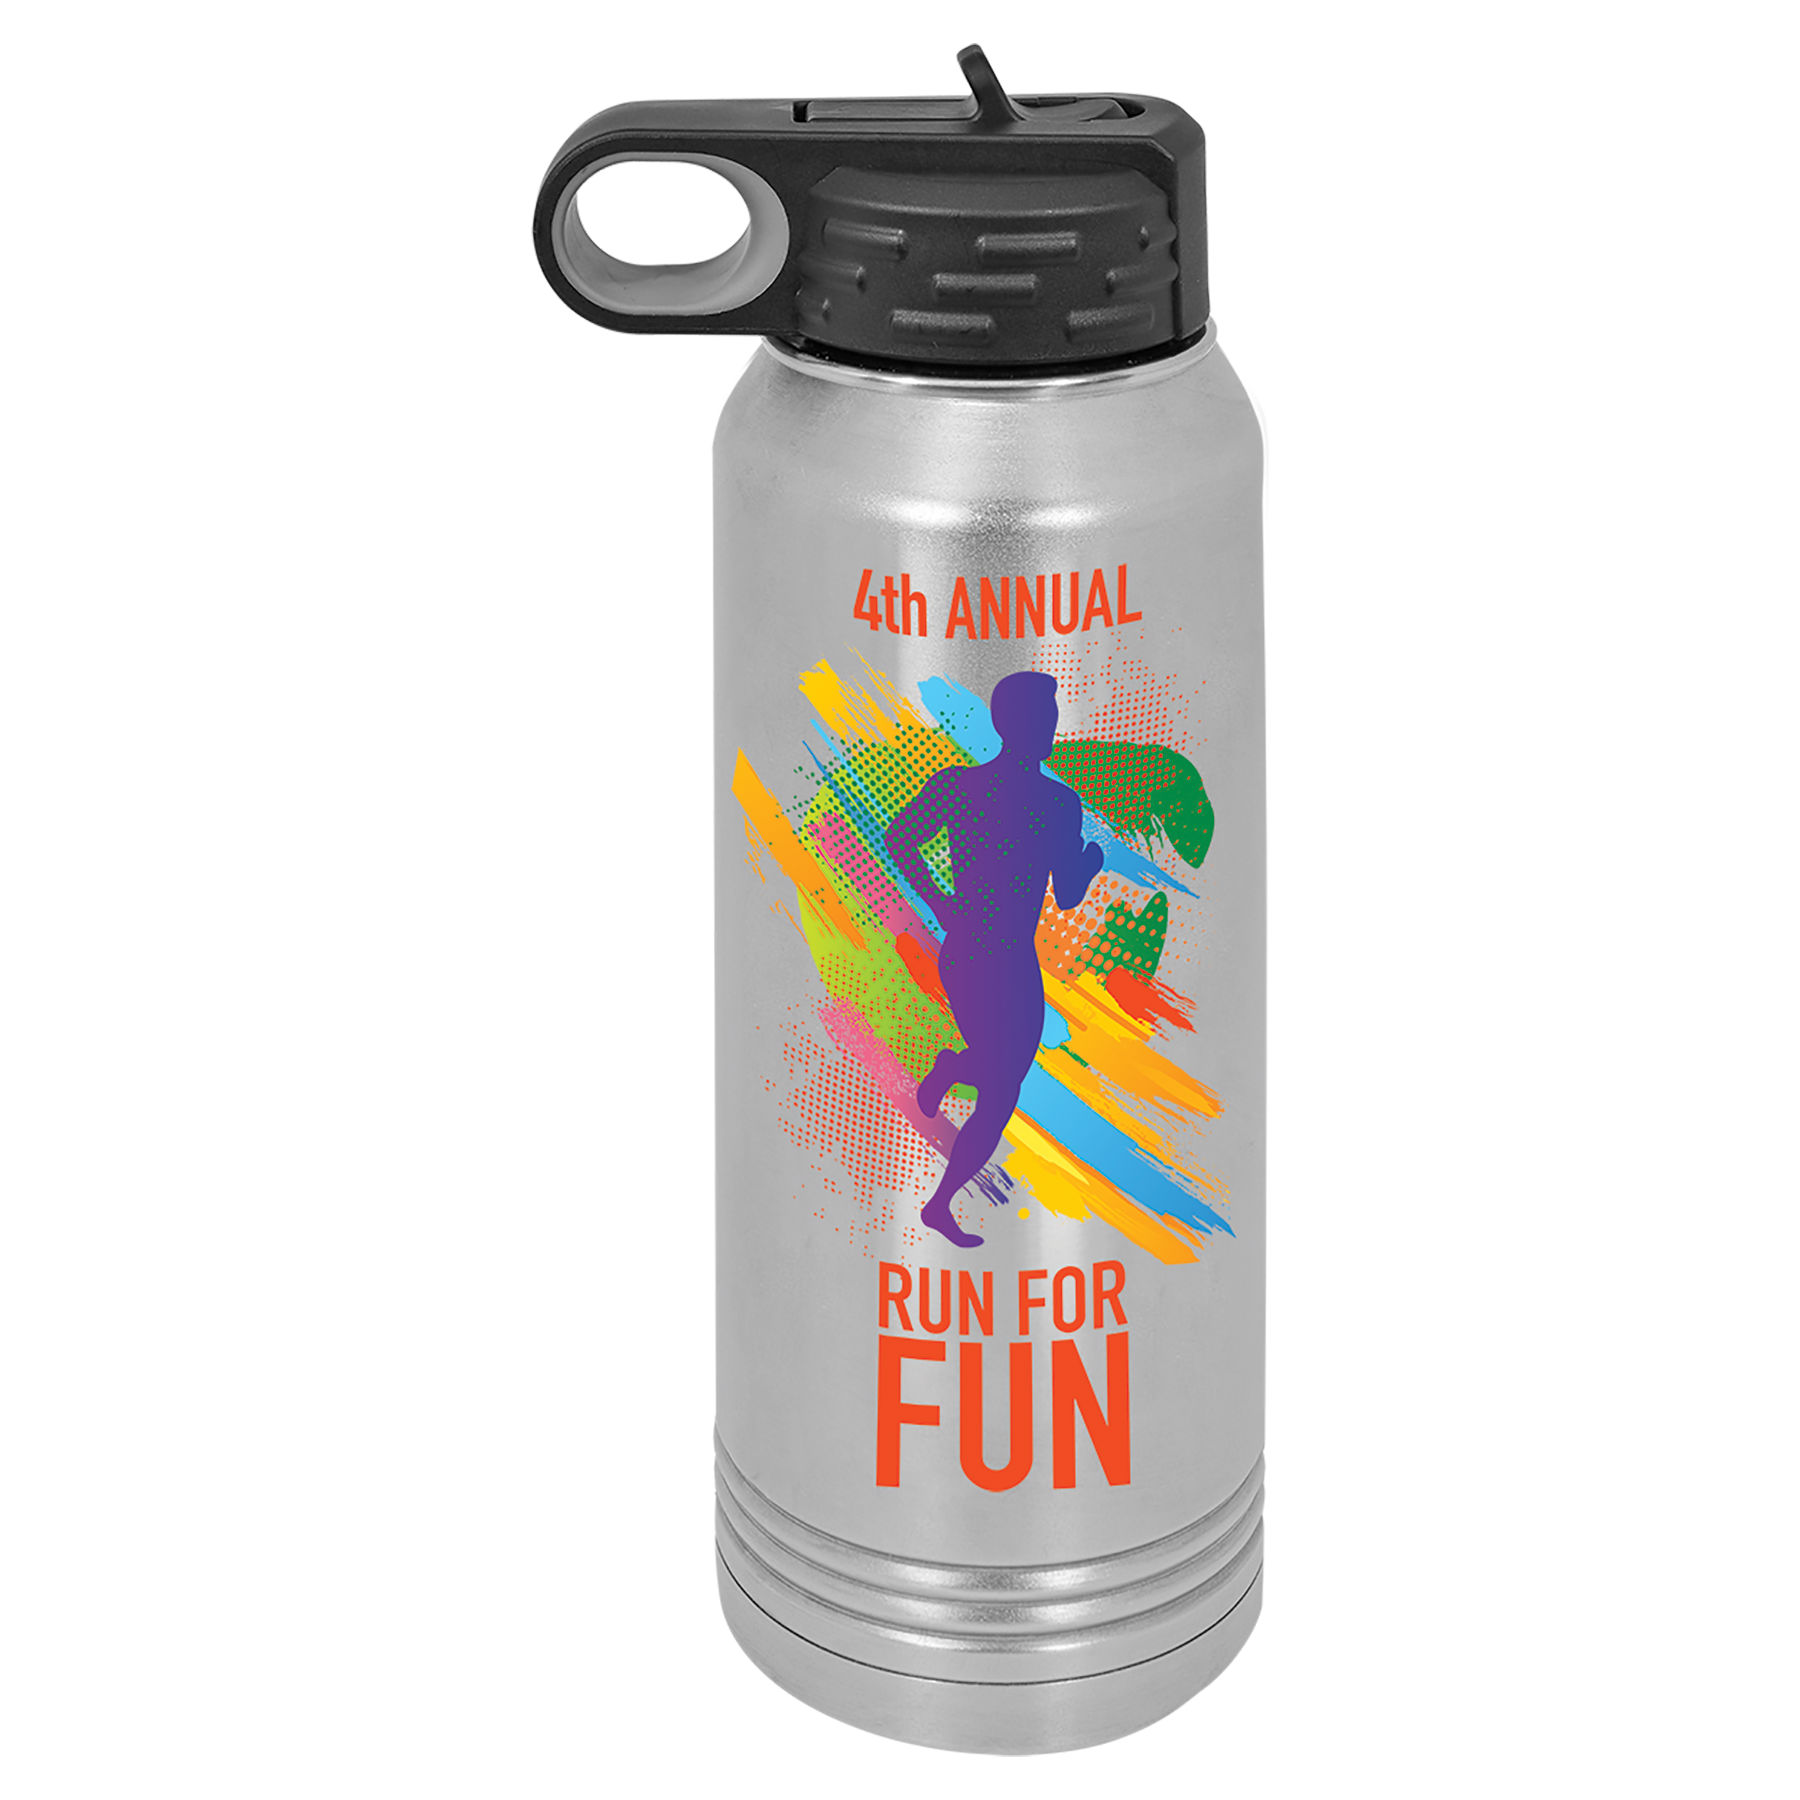 30 oz. Stainless Steel Full Color Imprintable Insulated Water Bottler.  Customizable with your personal image or saying.